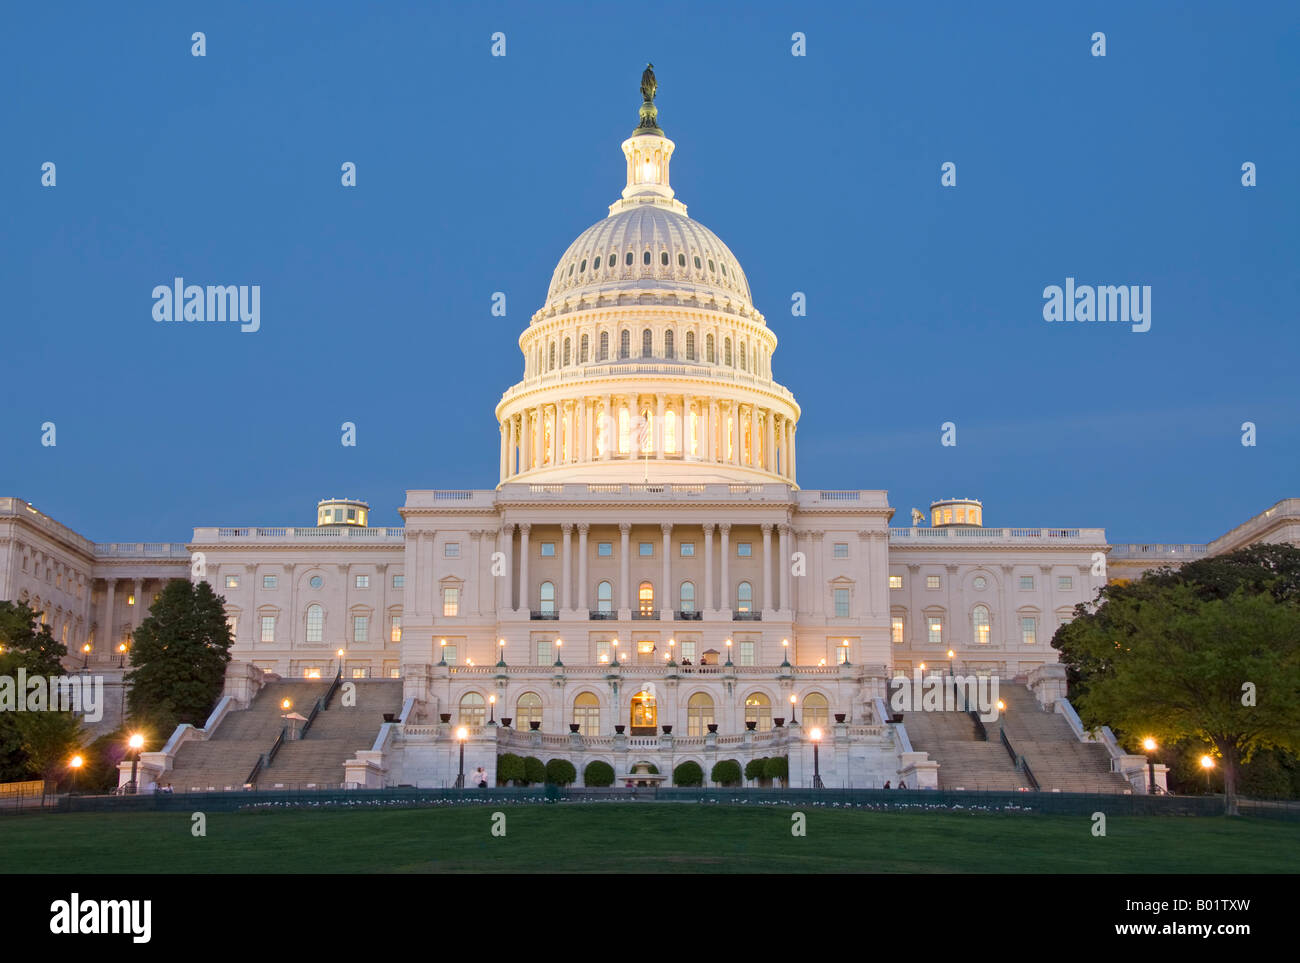 WASHINGTON DC, USA - The US Capitol Building, which houses the American Congress, at dusk on Capitol Hill in Washington DC. Stock Photo